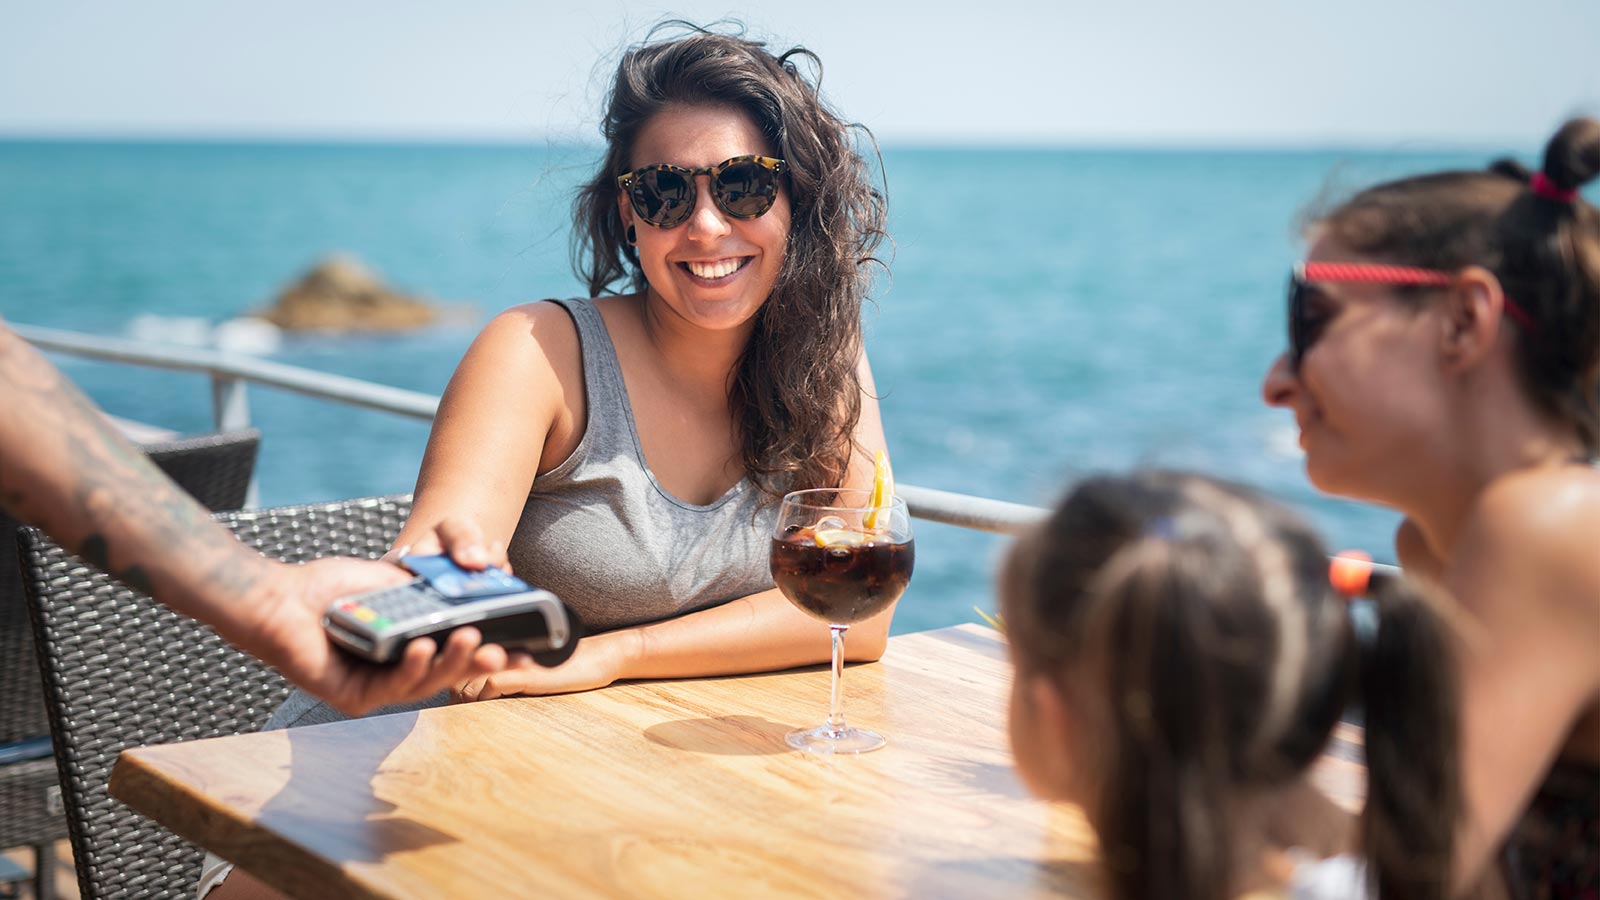 A woman sits in the sun enjoying a summer vacation and pays for a drink with her credit card to keep her money safe while she travels.